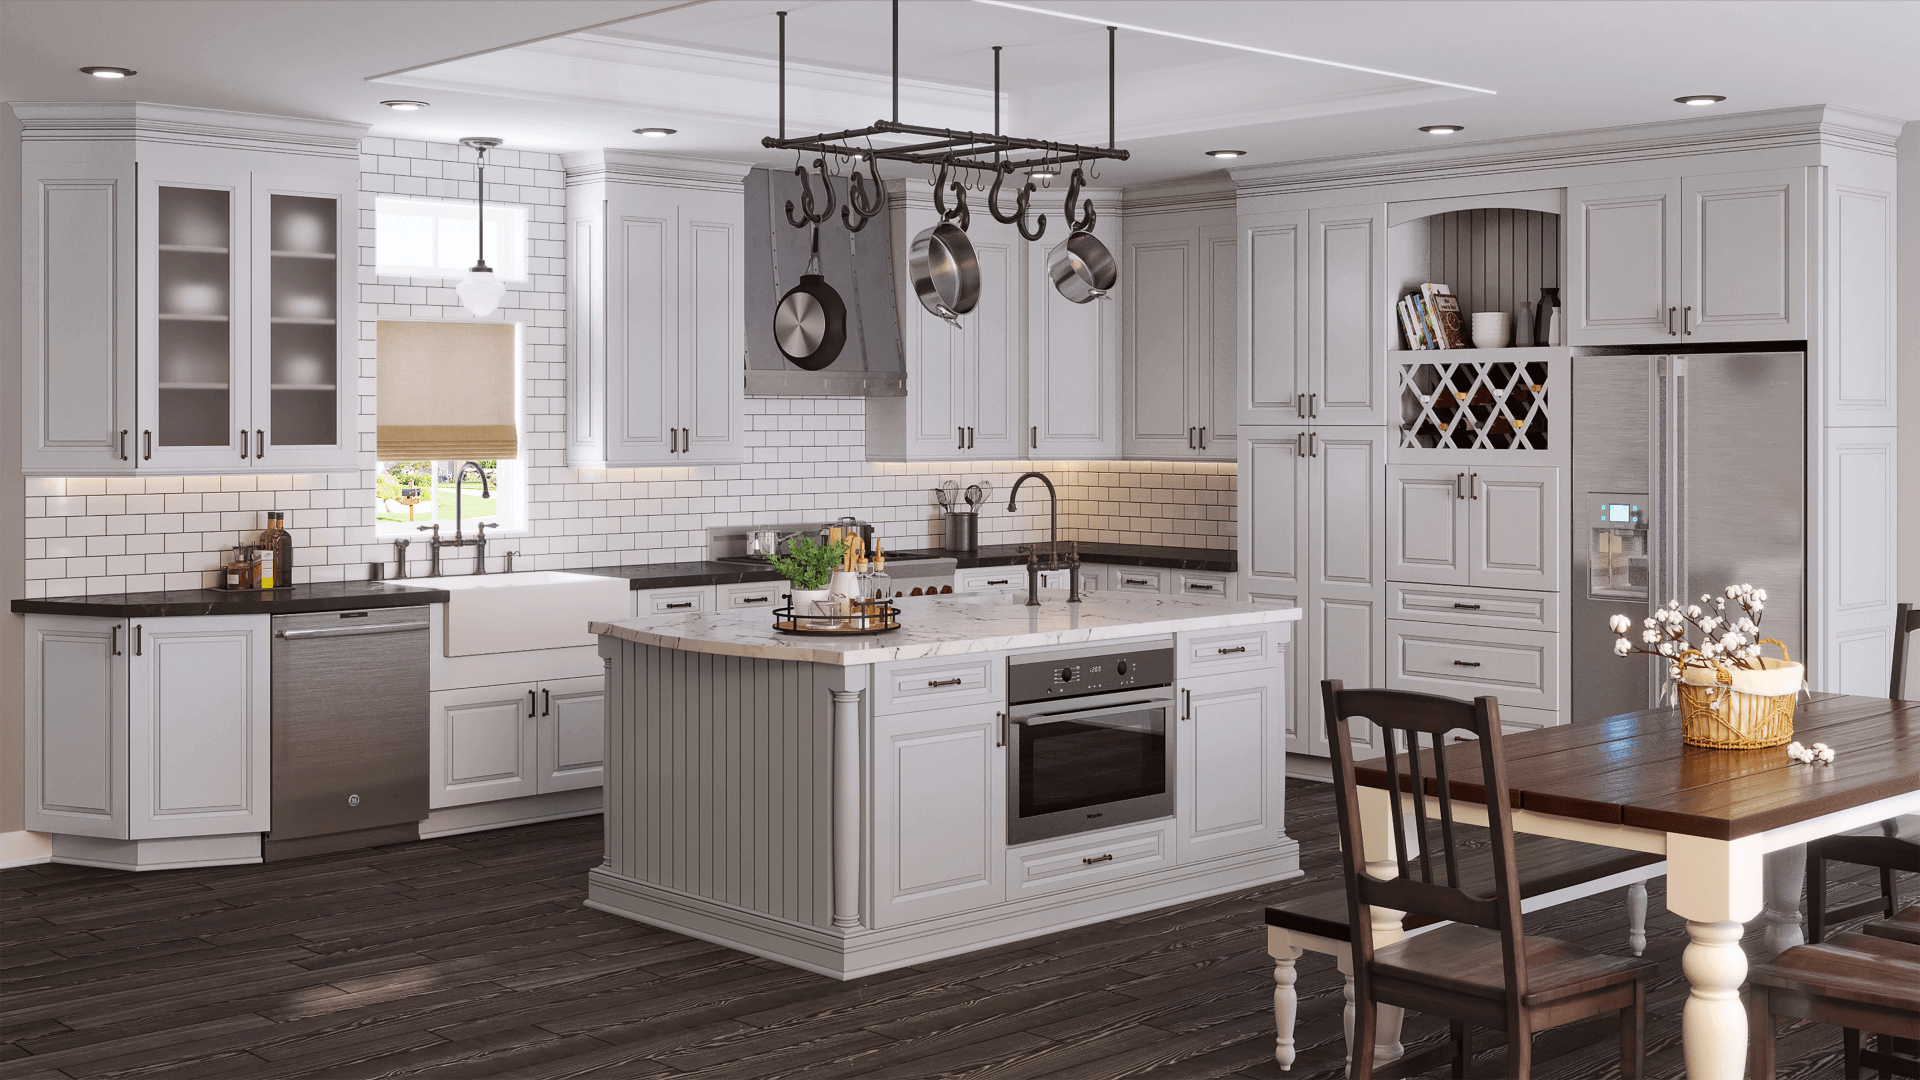 Ready To Assemble Kitchen Cabinets Sale,One Bedroom Apartment Ideas